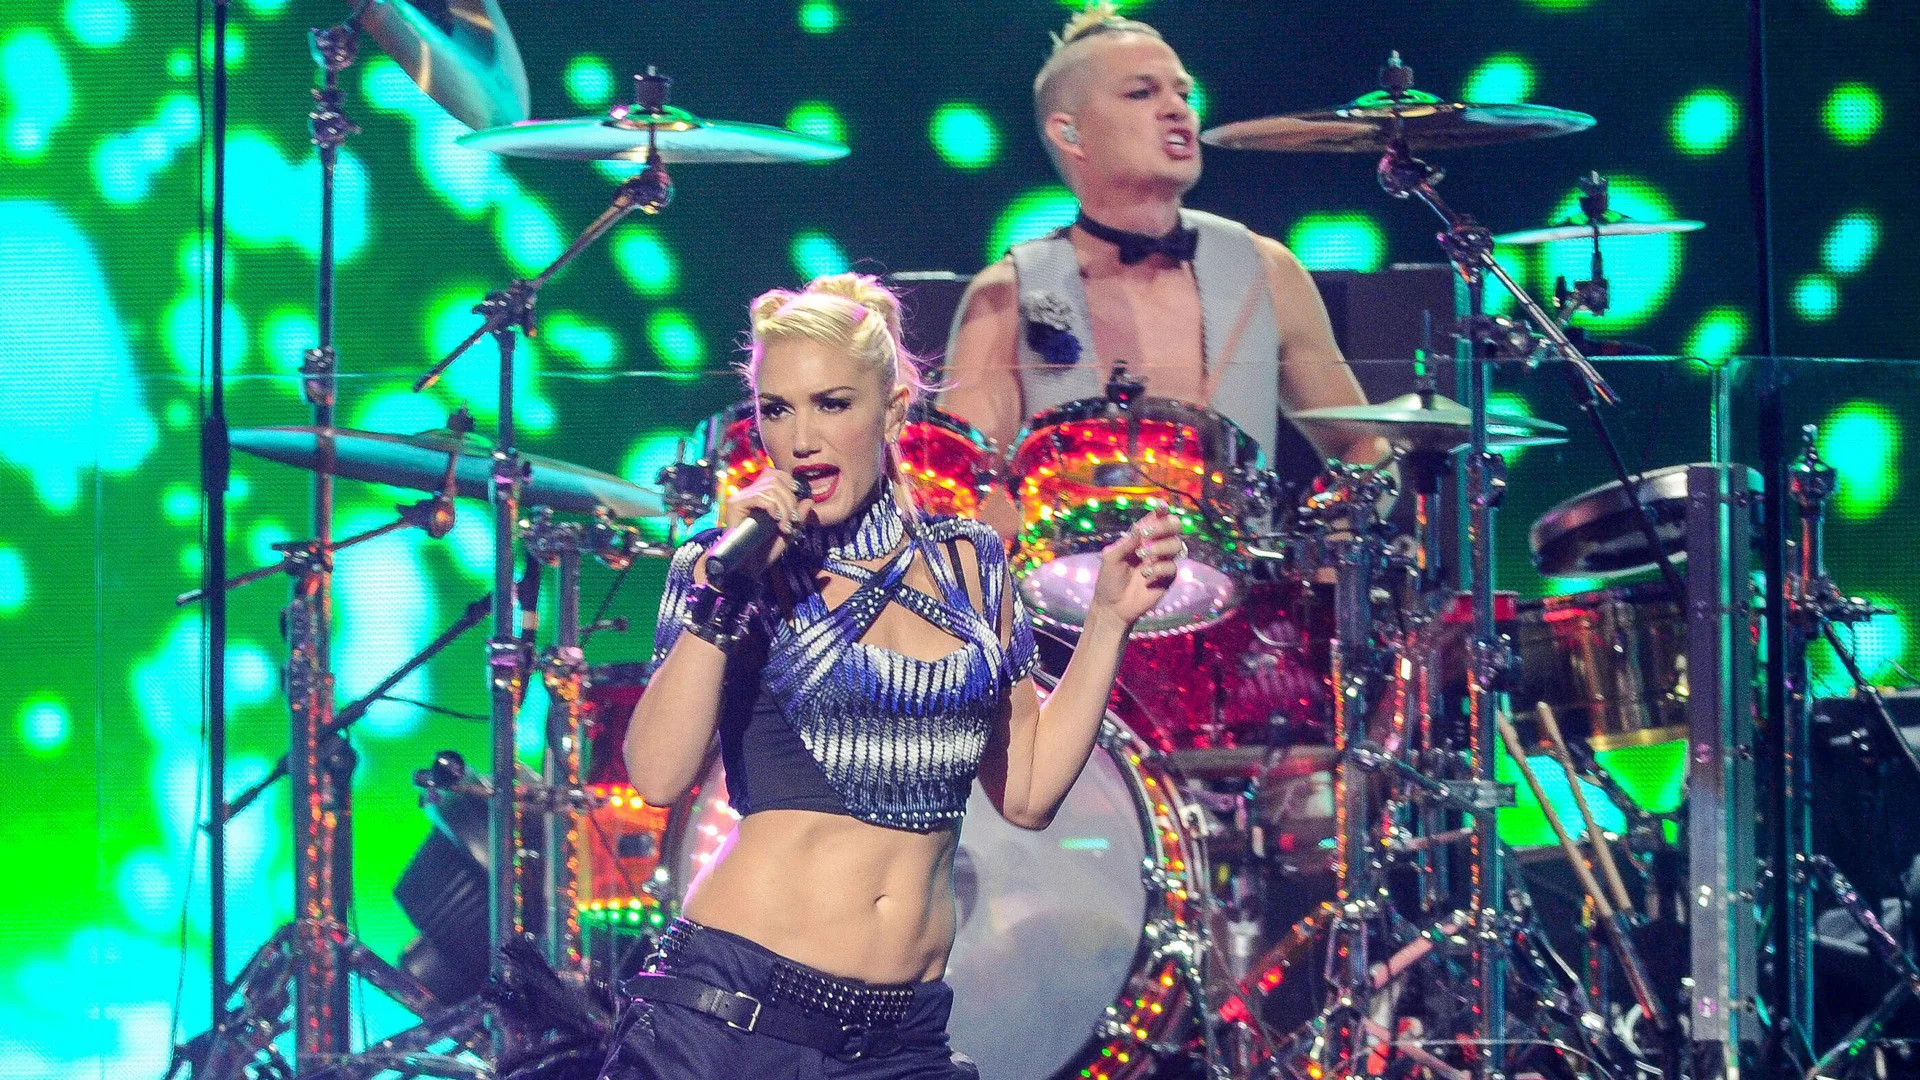 A photo of Gwen Stefani performing on stage in a cropped top with her drummer behind against green lights